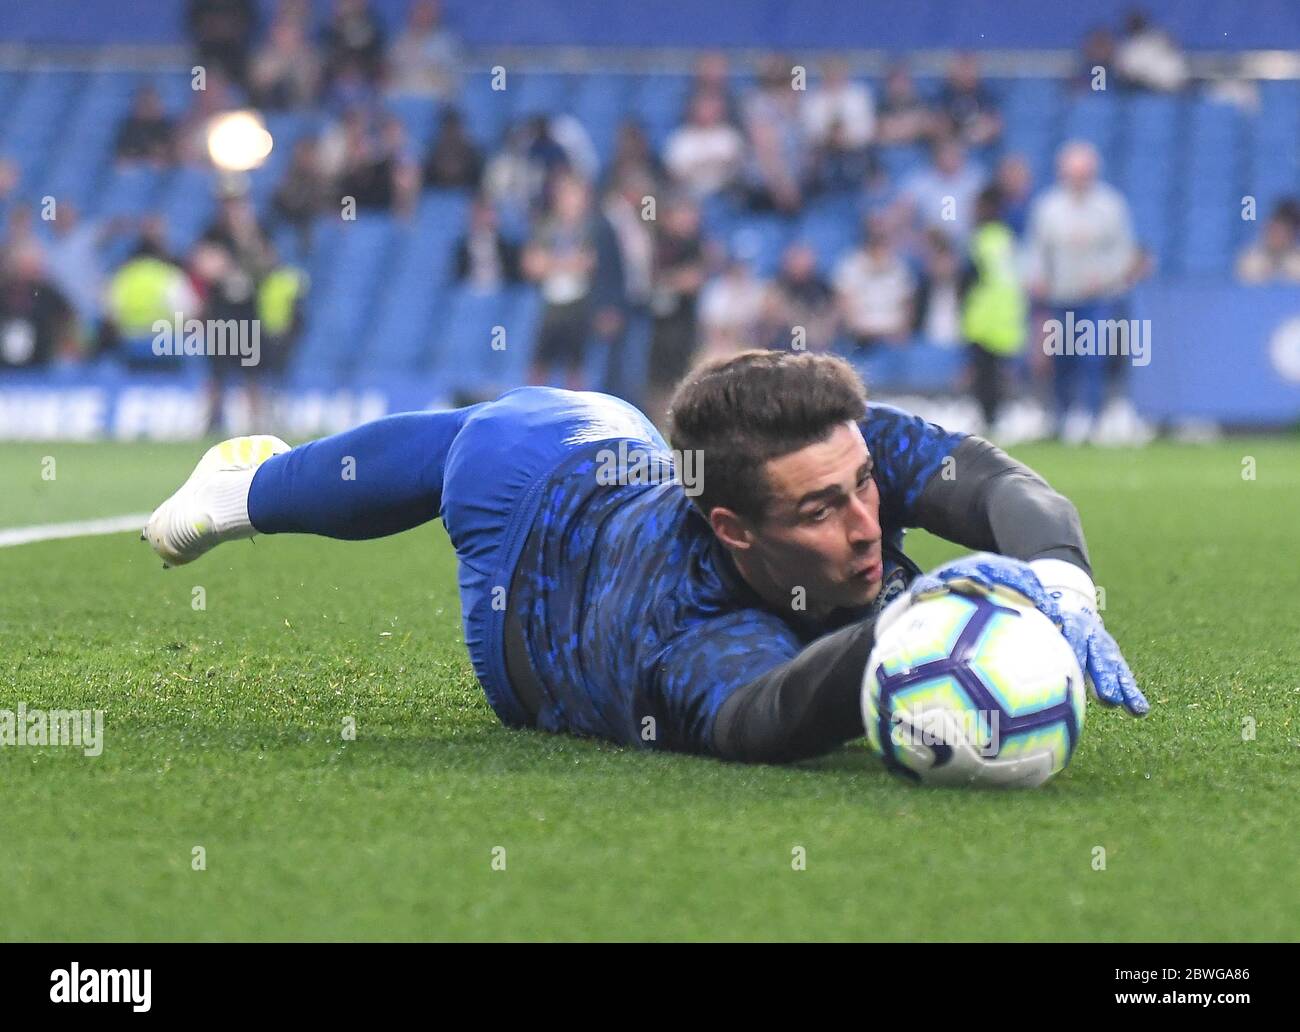 LONDON, ENGLAND - APRIL 22, 2019: Kepa Arrizabalaga of Chelsea pictured ahead of the 2018/19 Premier League game between Chelsea FC and Burnley FC at Stamford Bridge. Stock Photo